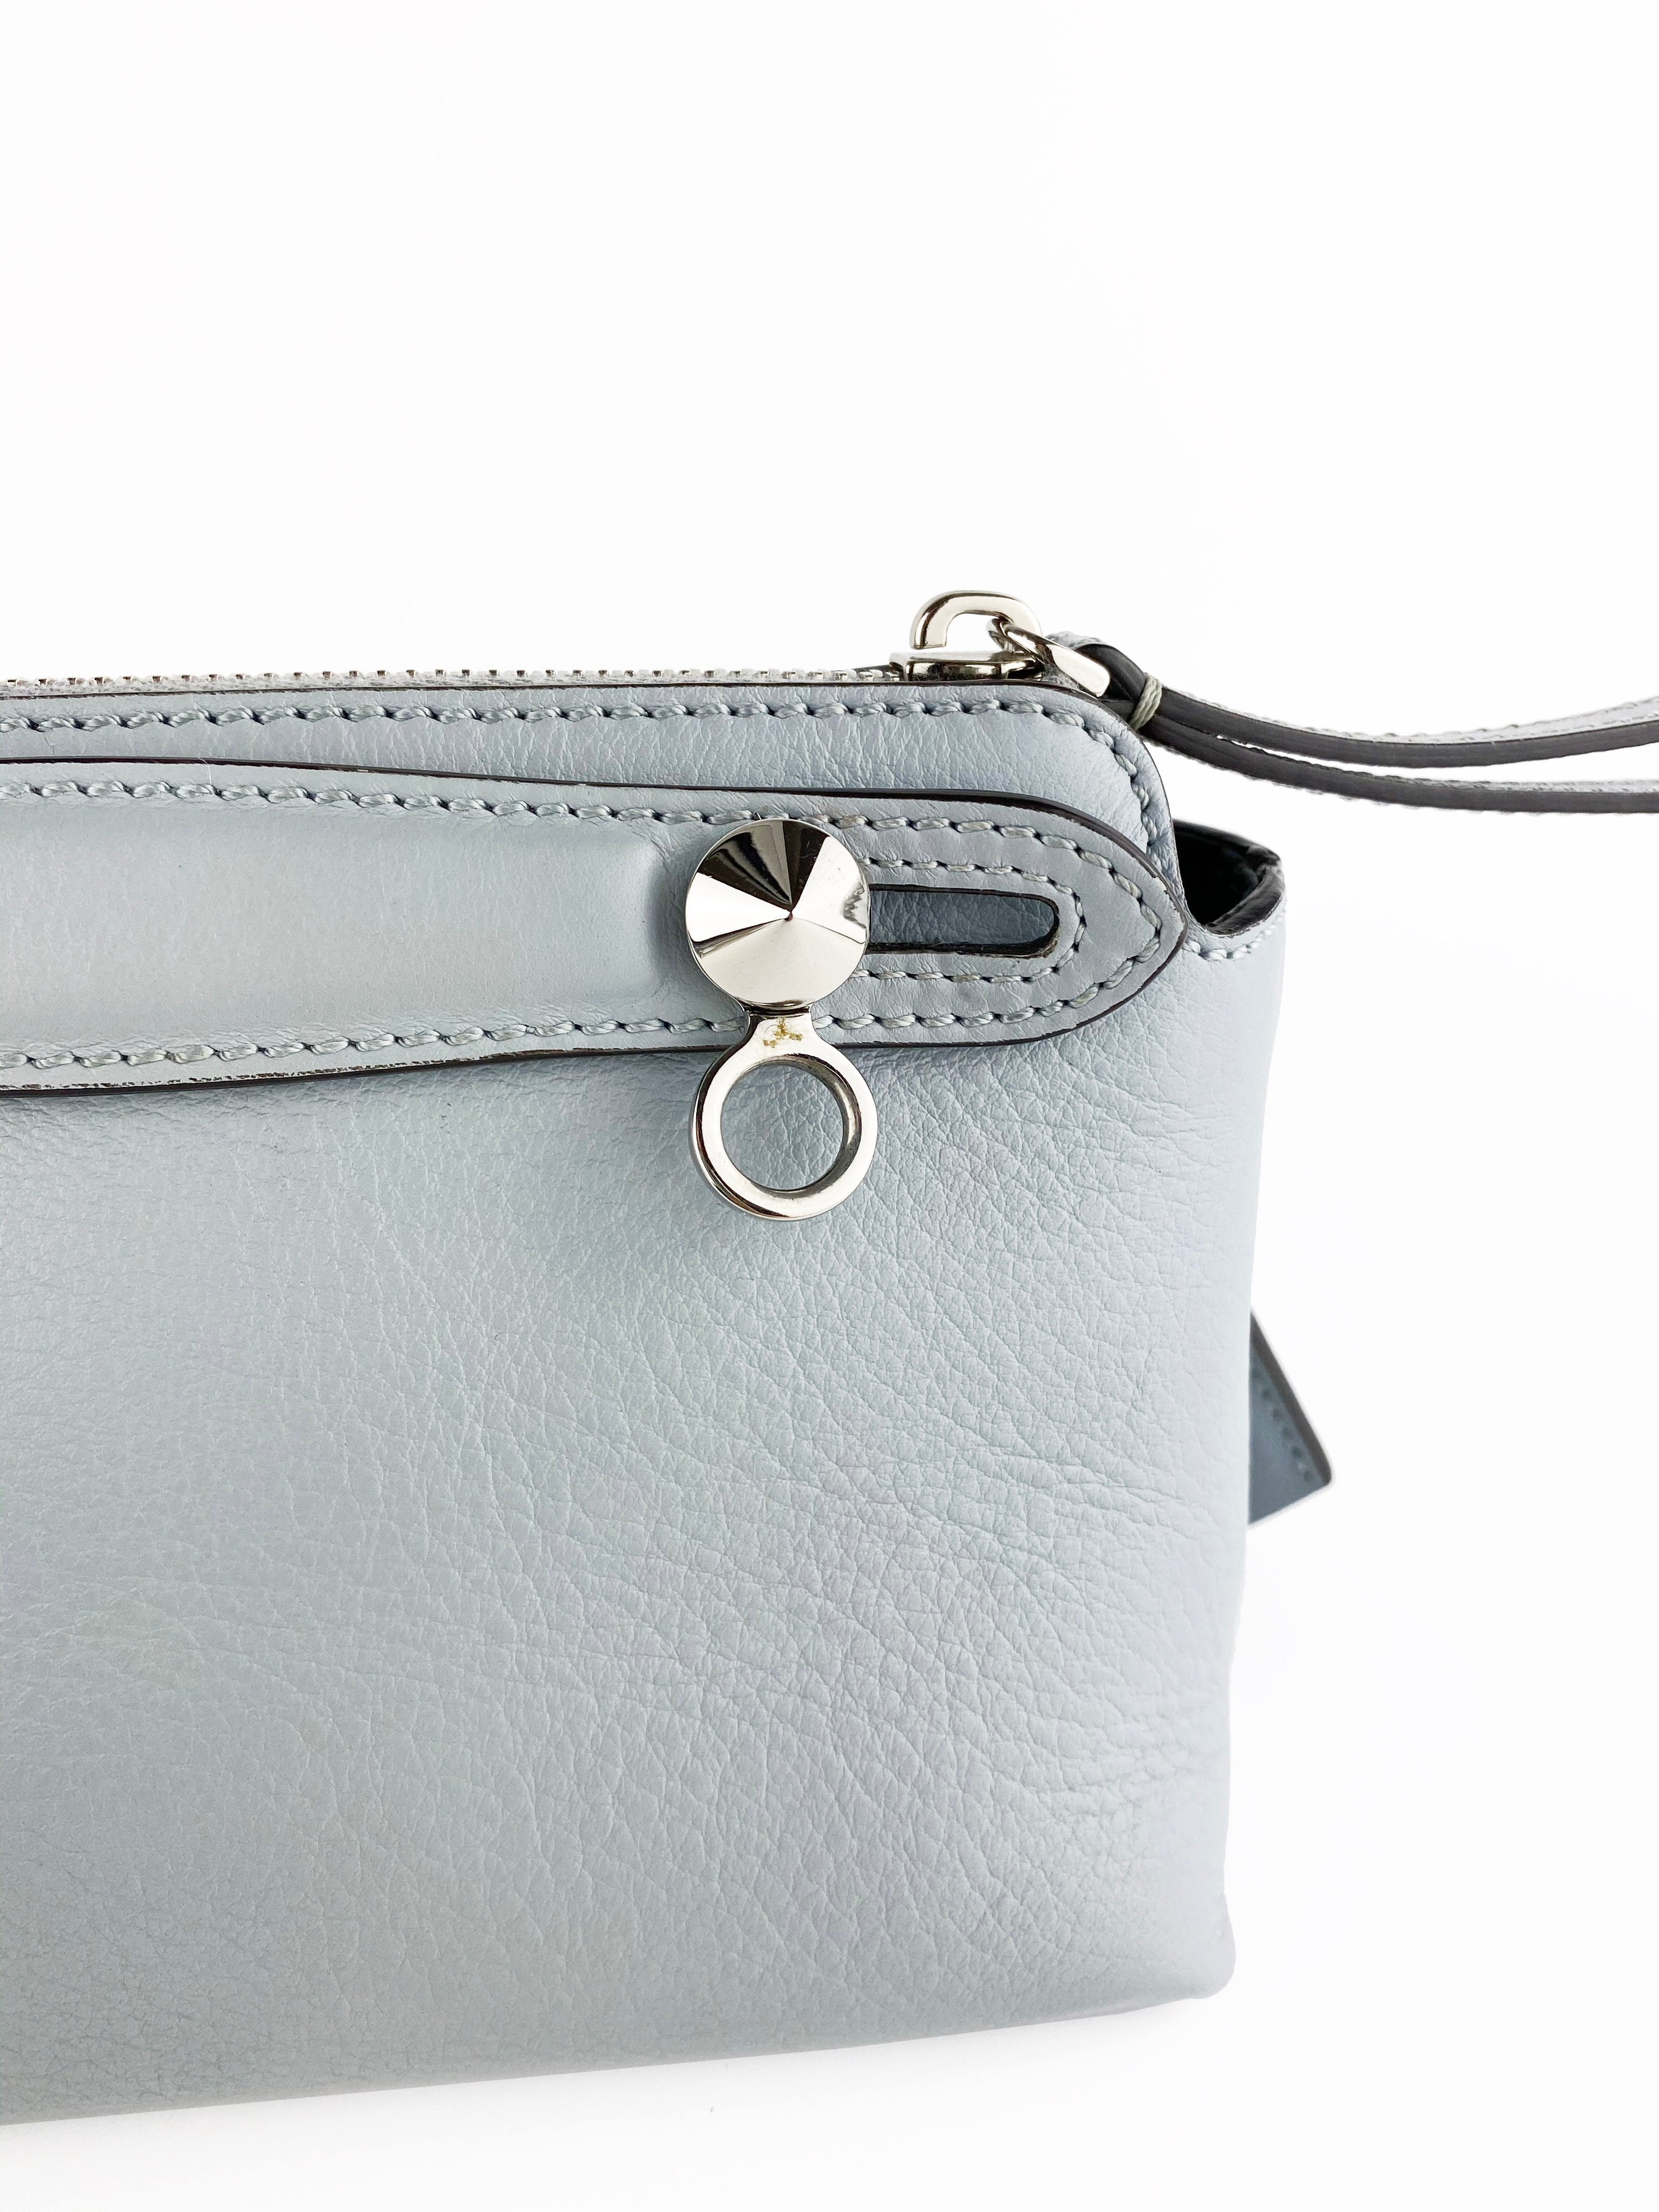 Fendi Light Blue By the Way Bag with Flower Tail